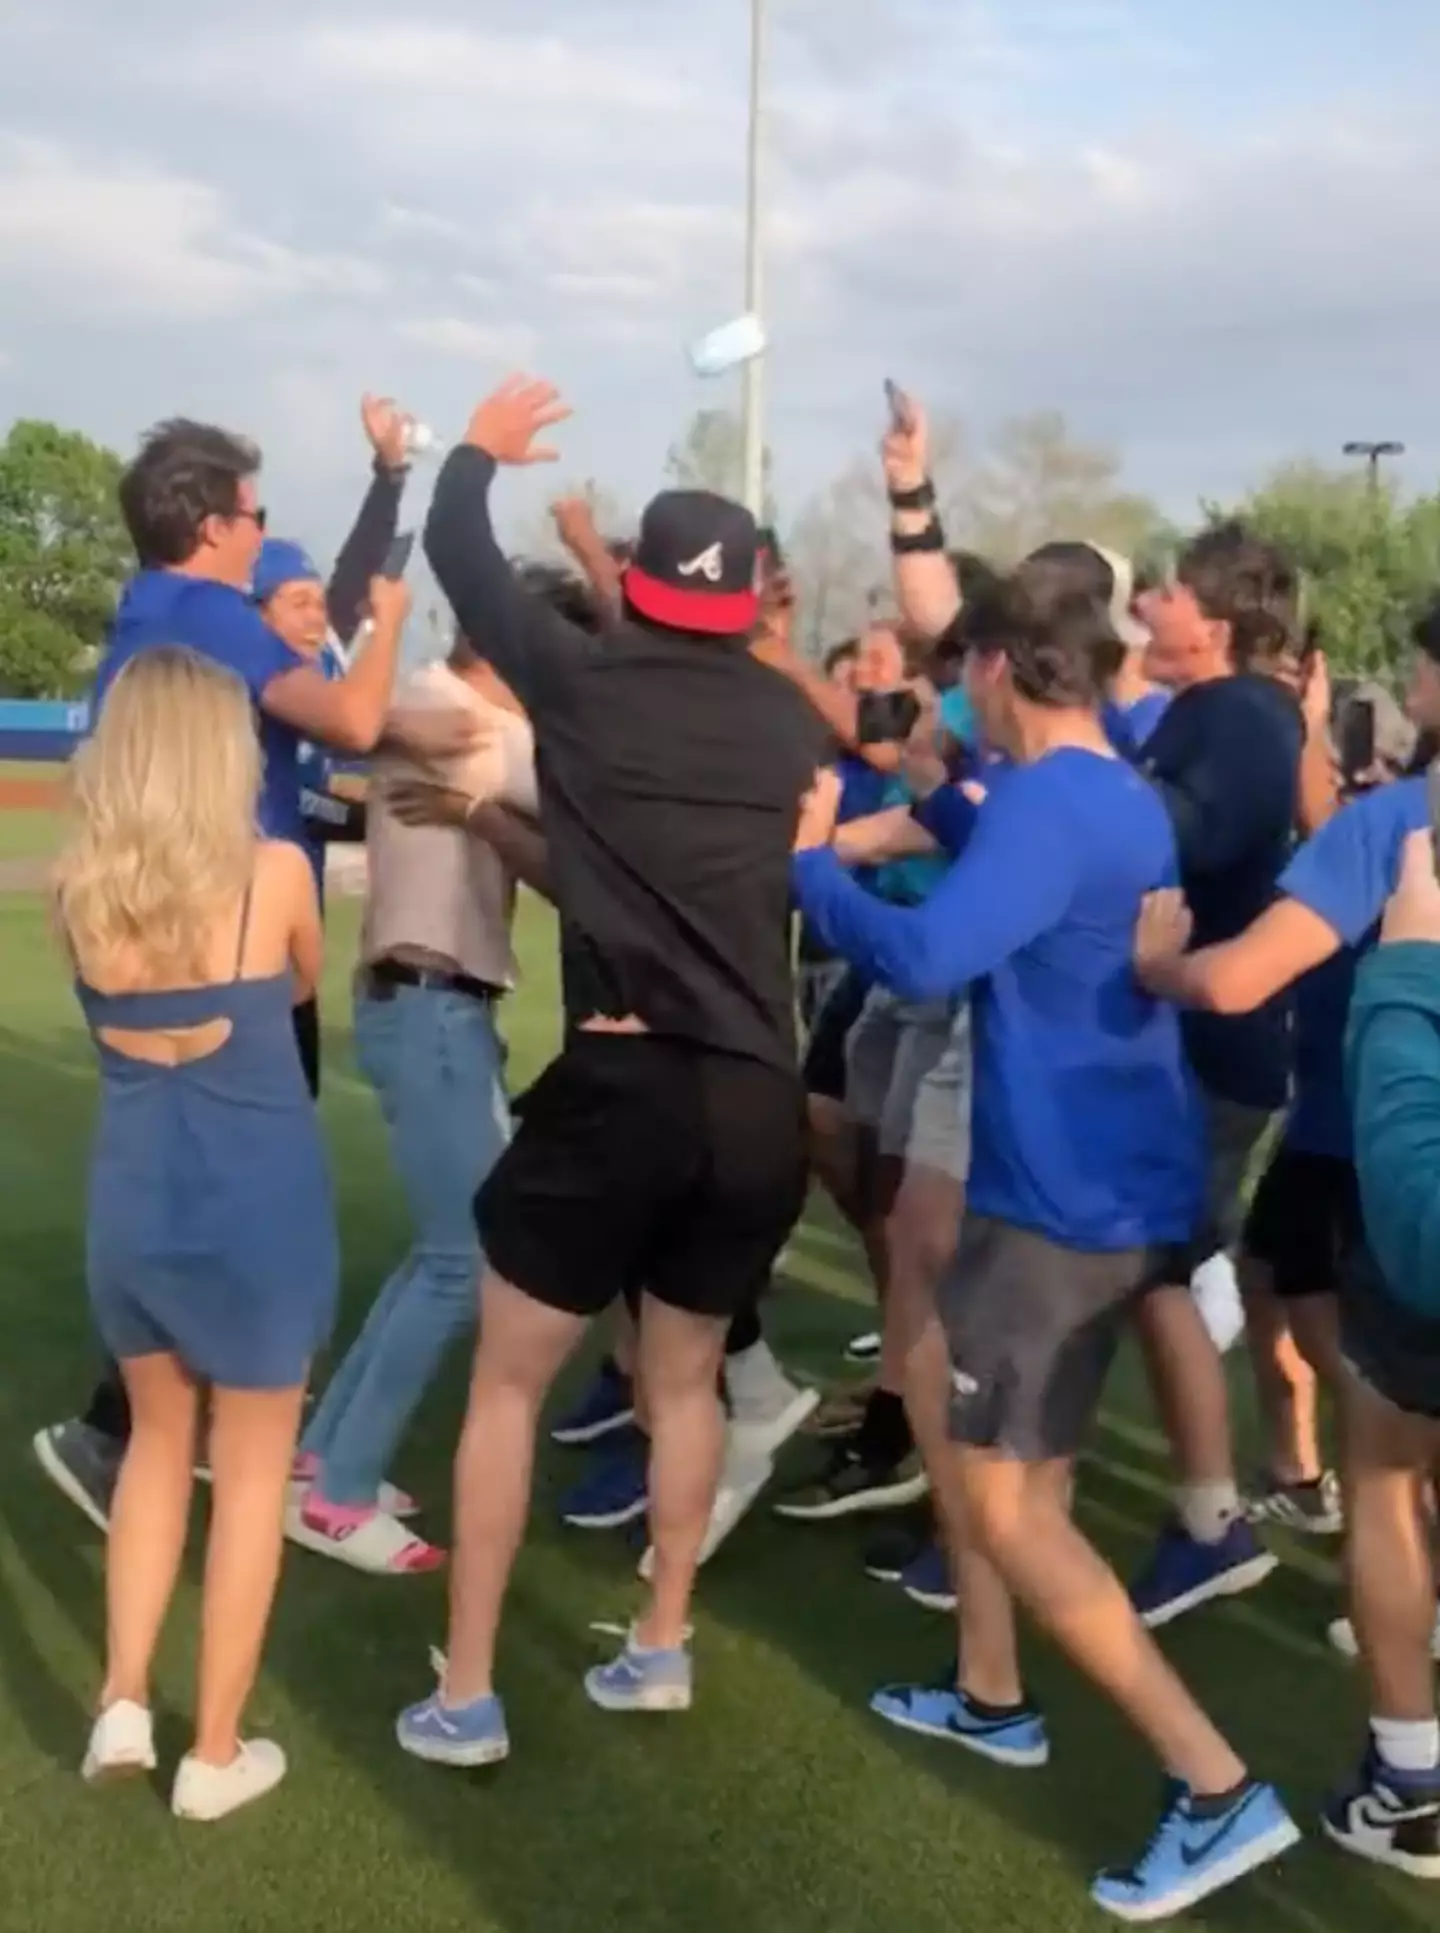 Hannah can be seen being pushed out of the way as her boyfriend celebrates with his mates.